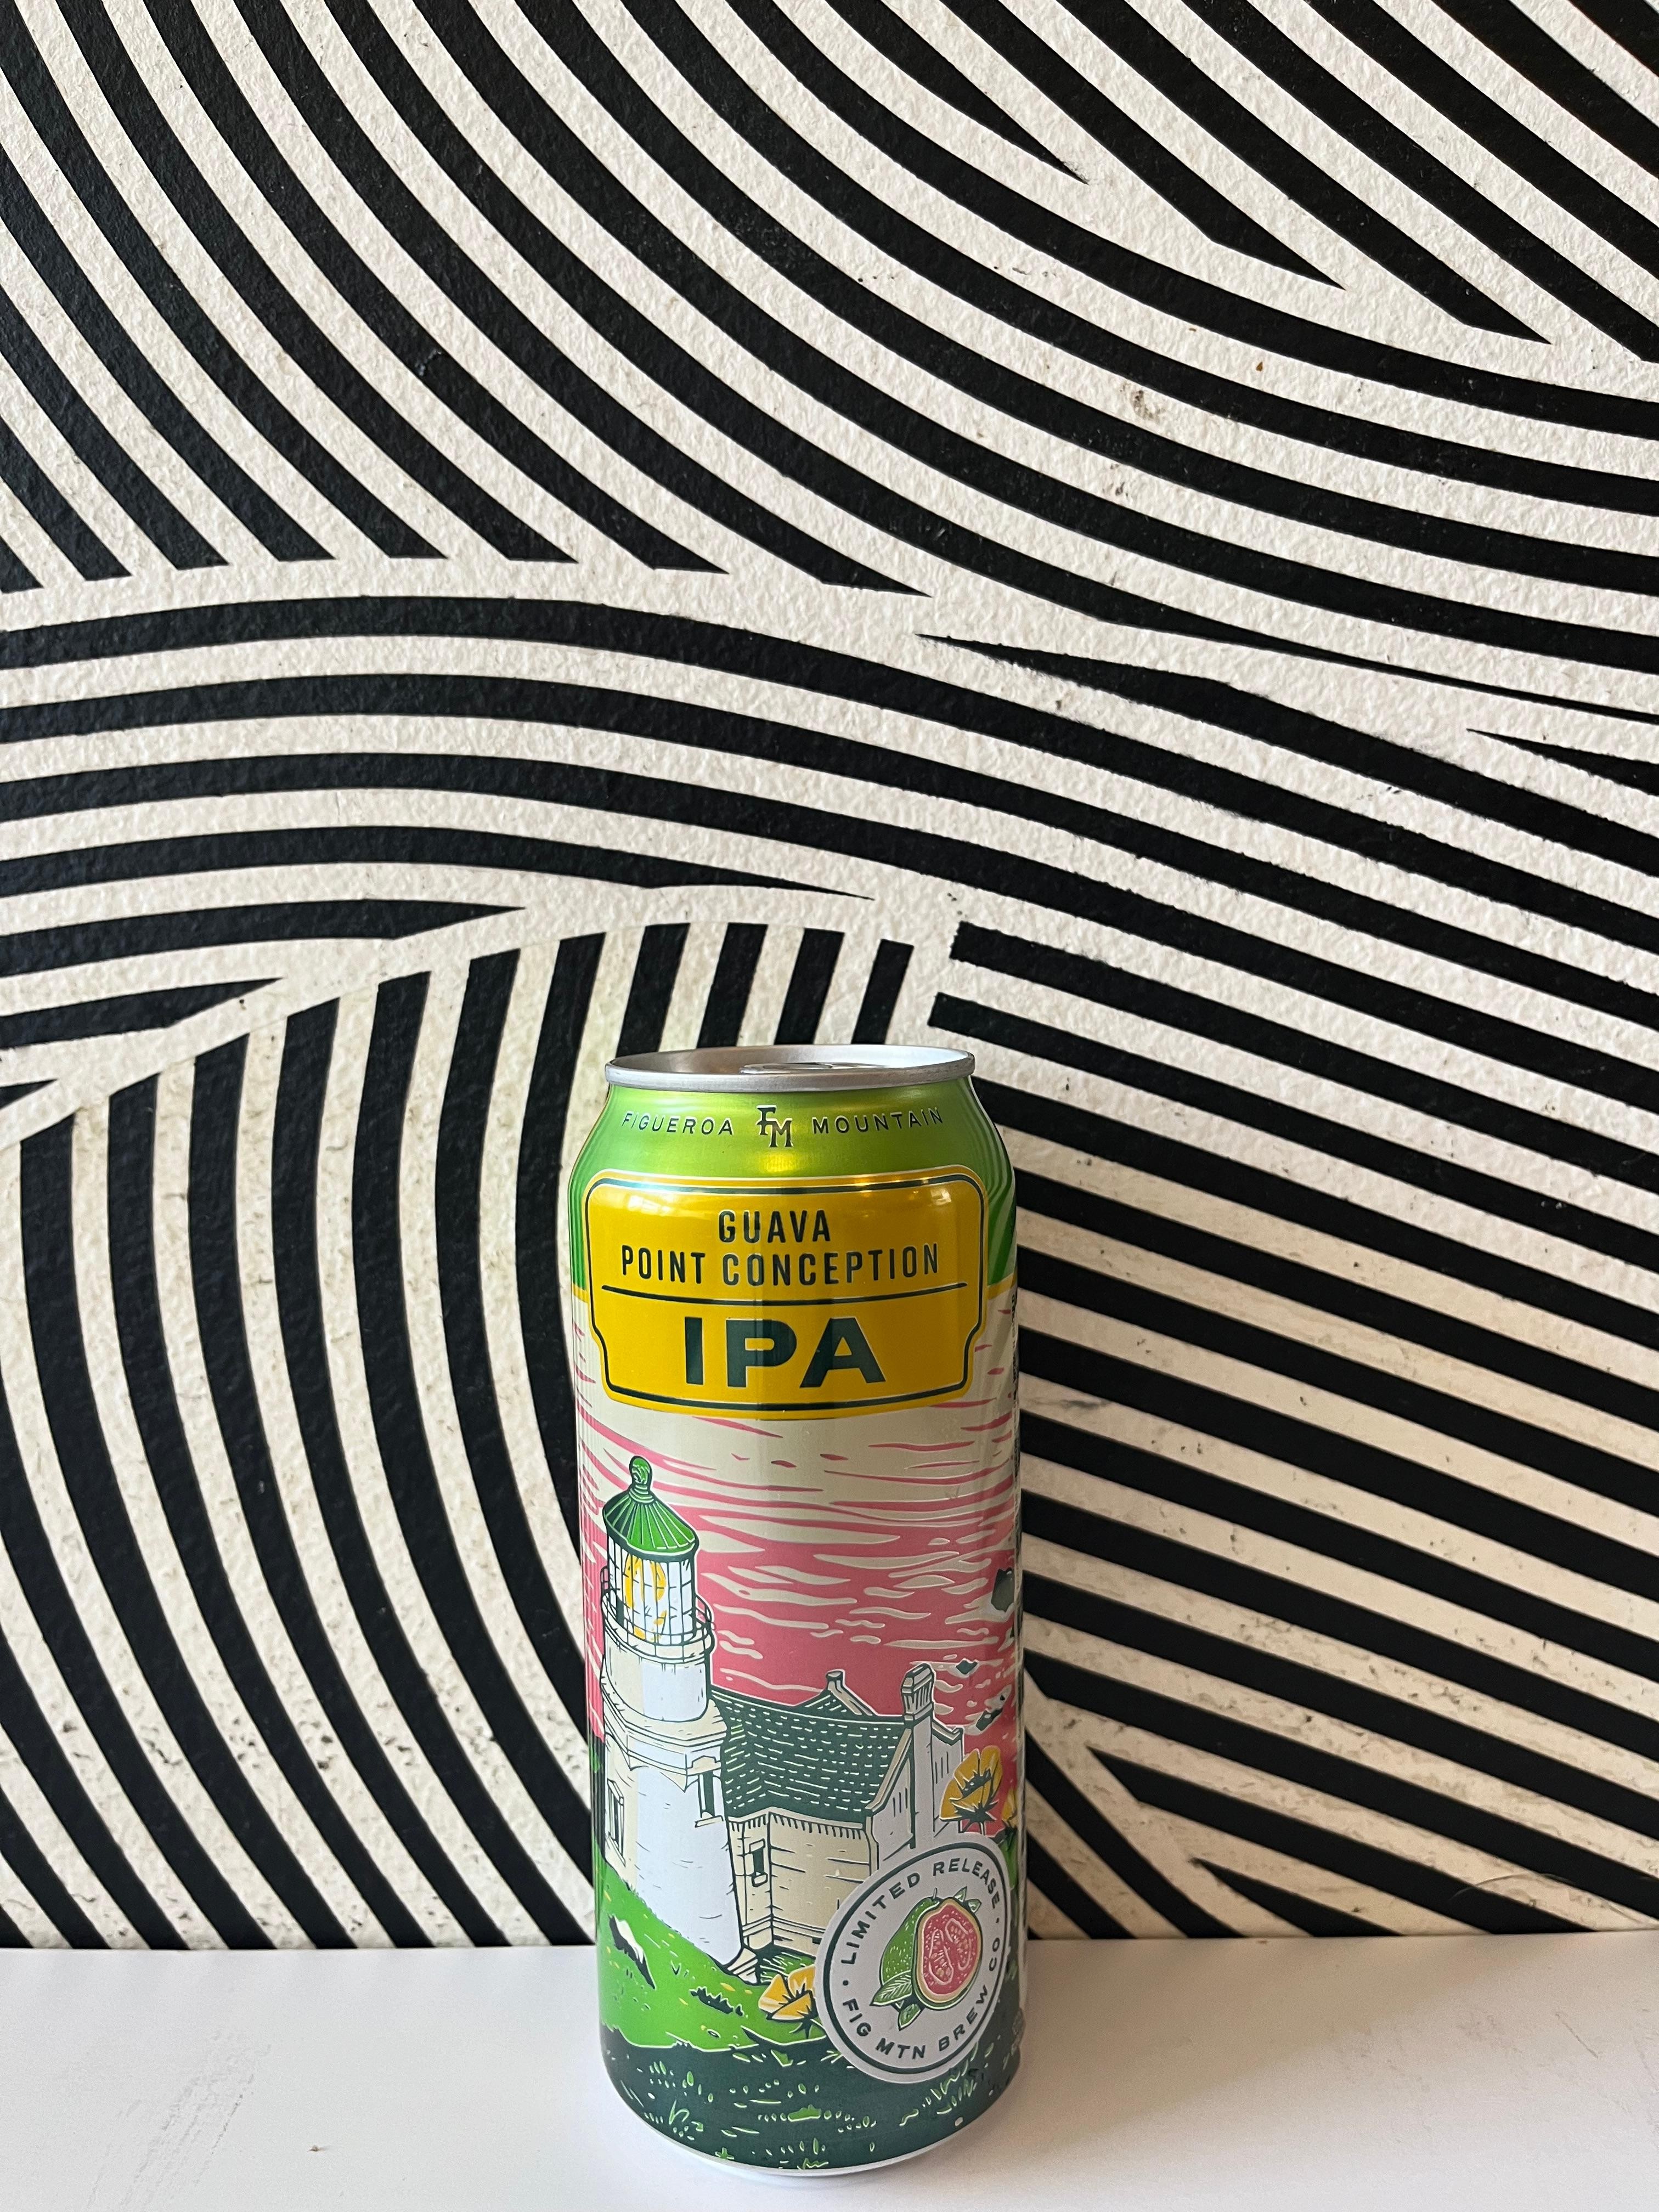 Guava Point Conception IPA